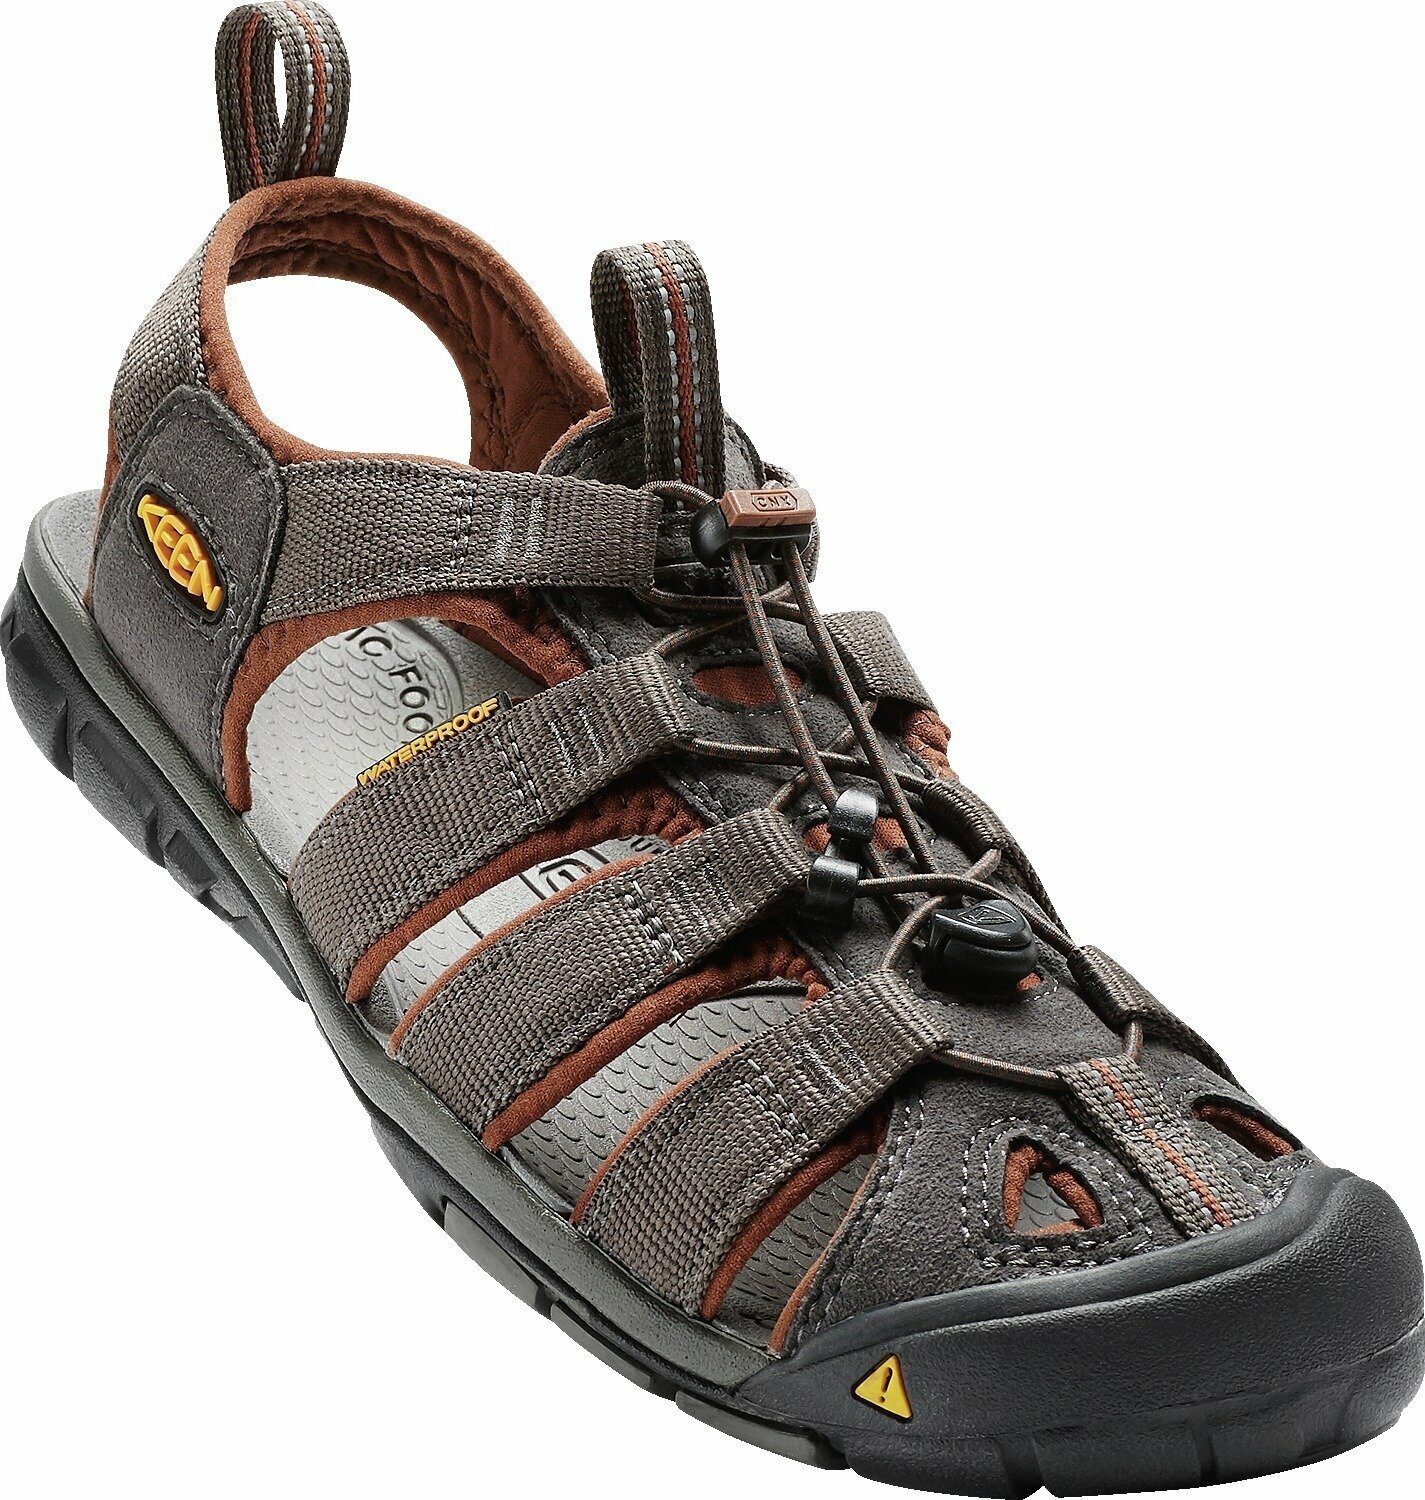 Mens Outdoor Shoes Keen Men's Clearwater CNX Sandal Raven/Tortoise Shell 42,5 Mens Outdoor Shoes